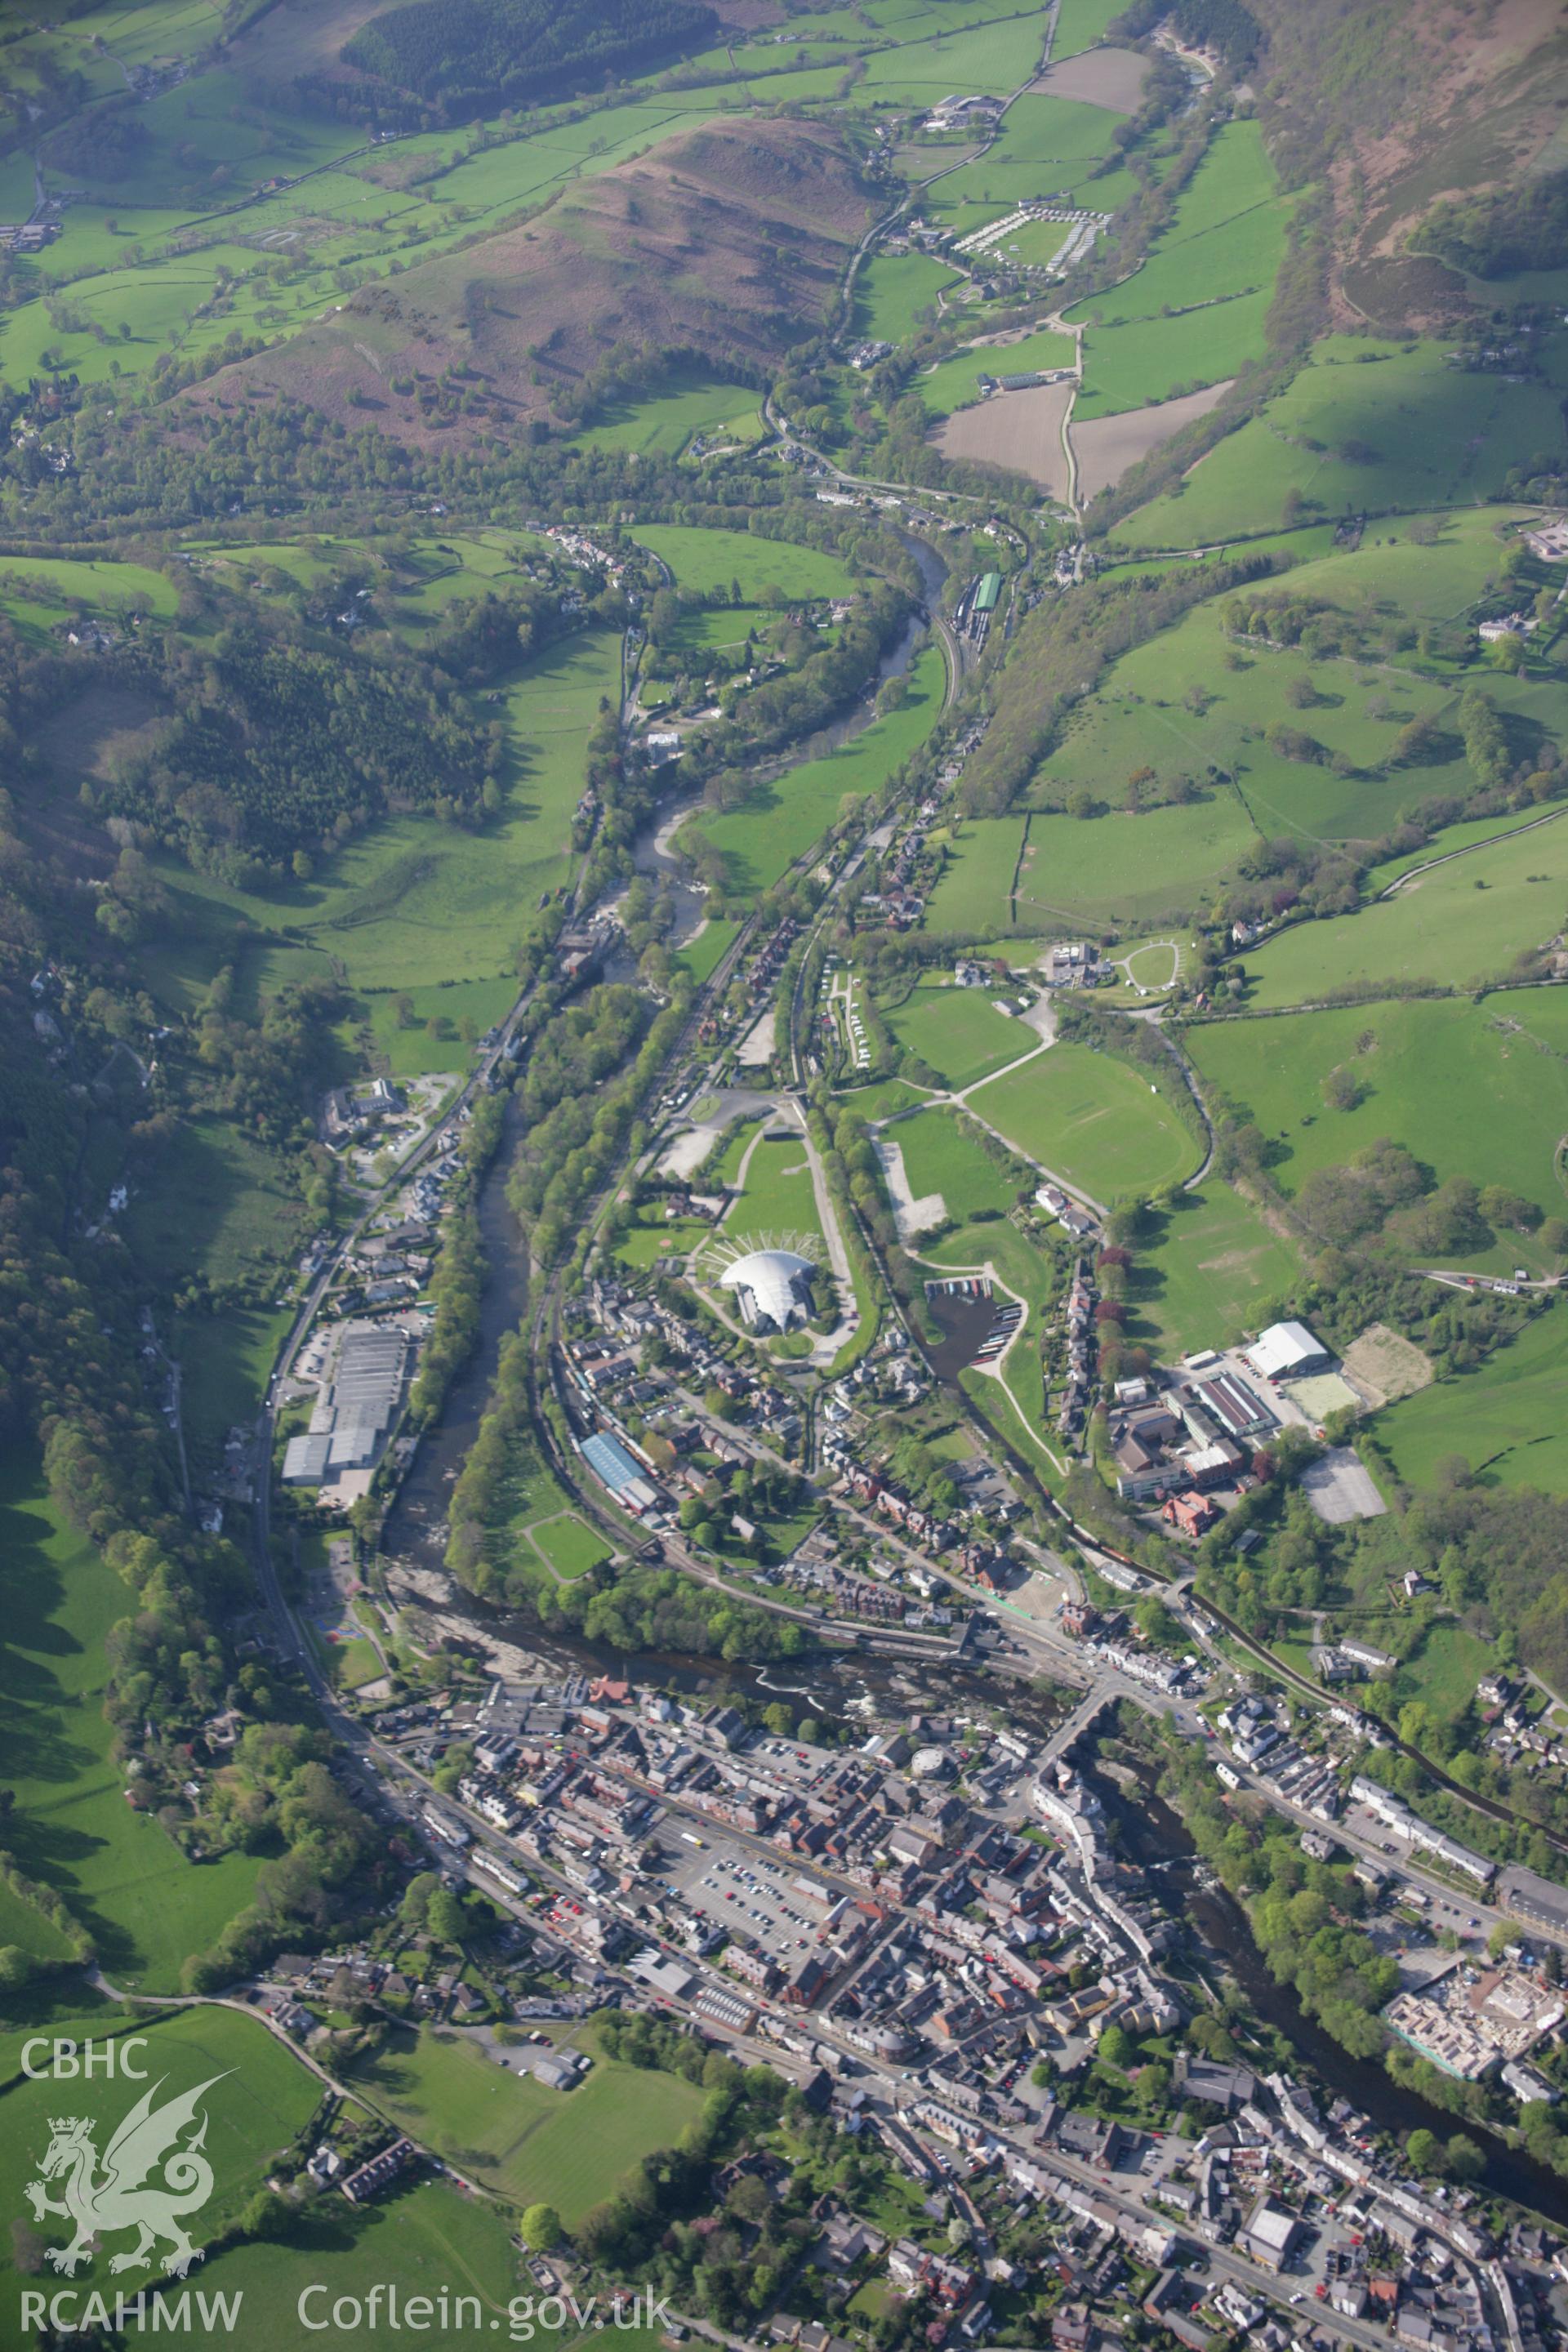 RCAHMW digital colour oblique photograph of Llangollen viewed from the south-east. Taken on 05/05/2006 by T.G. Driver.